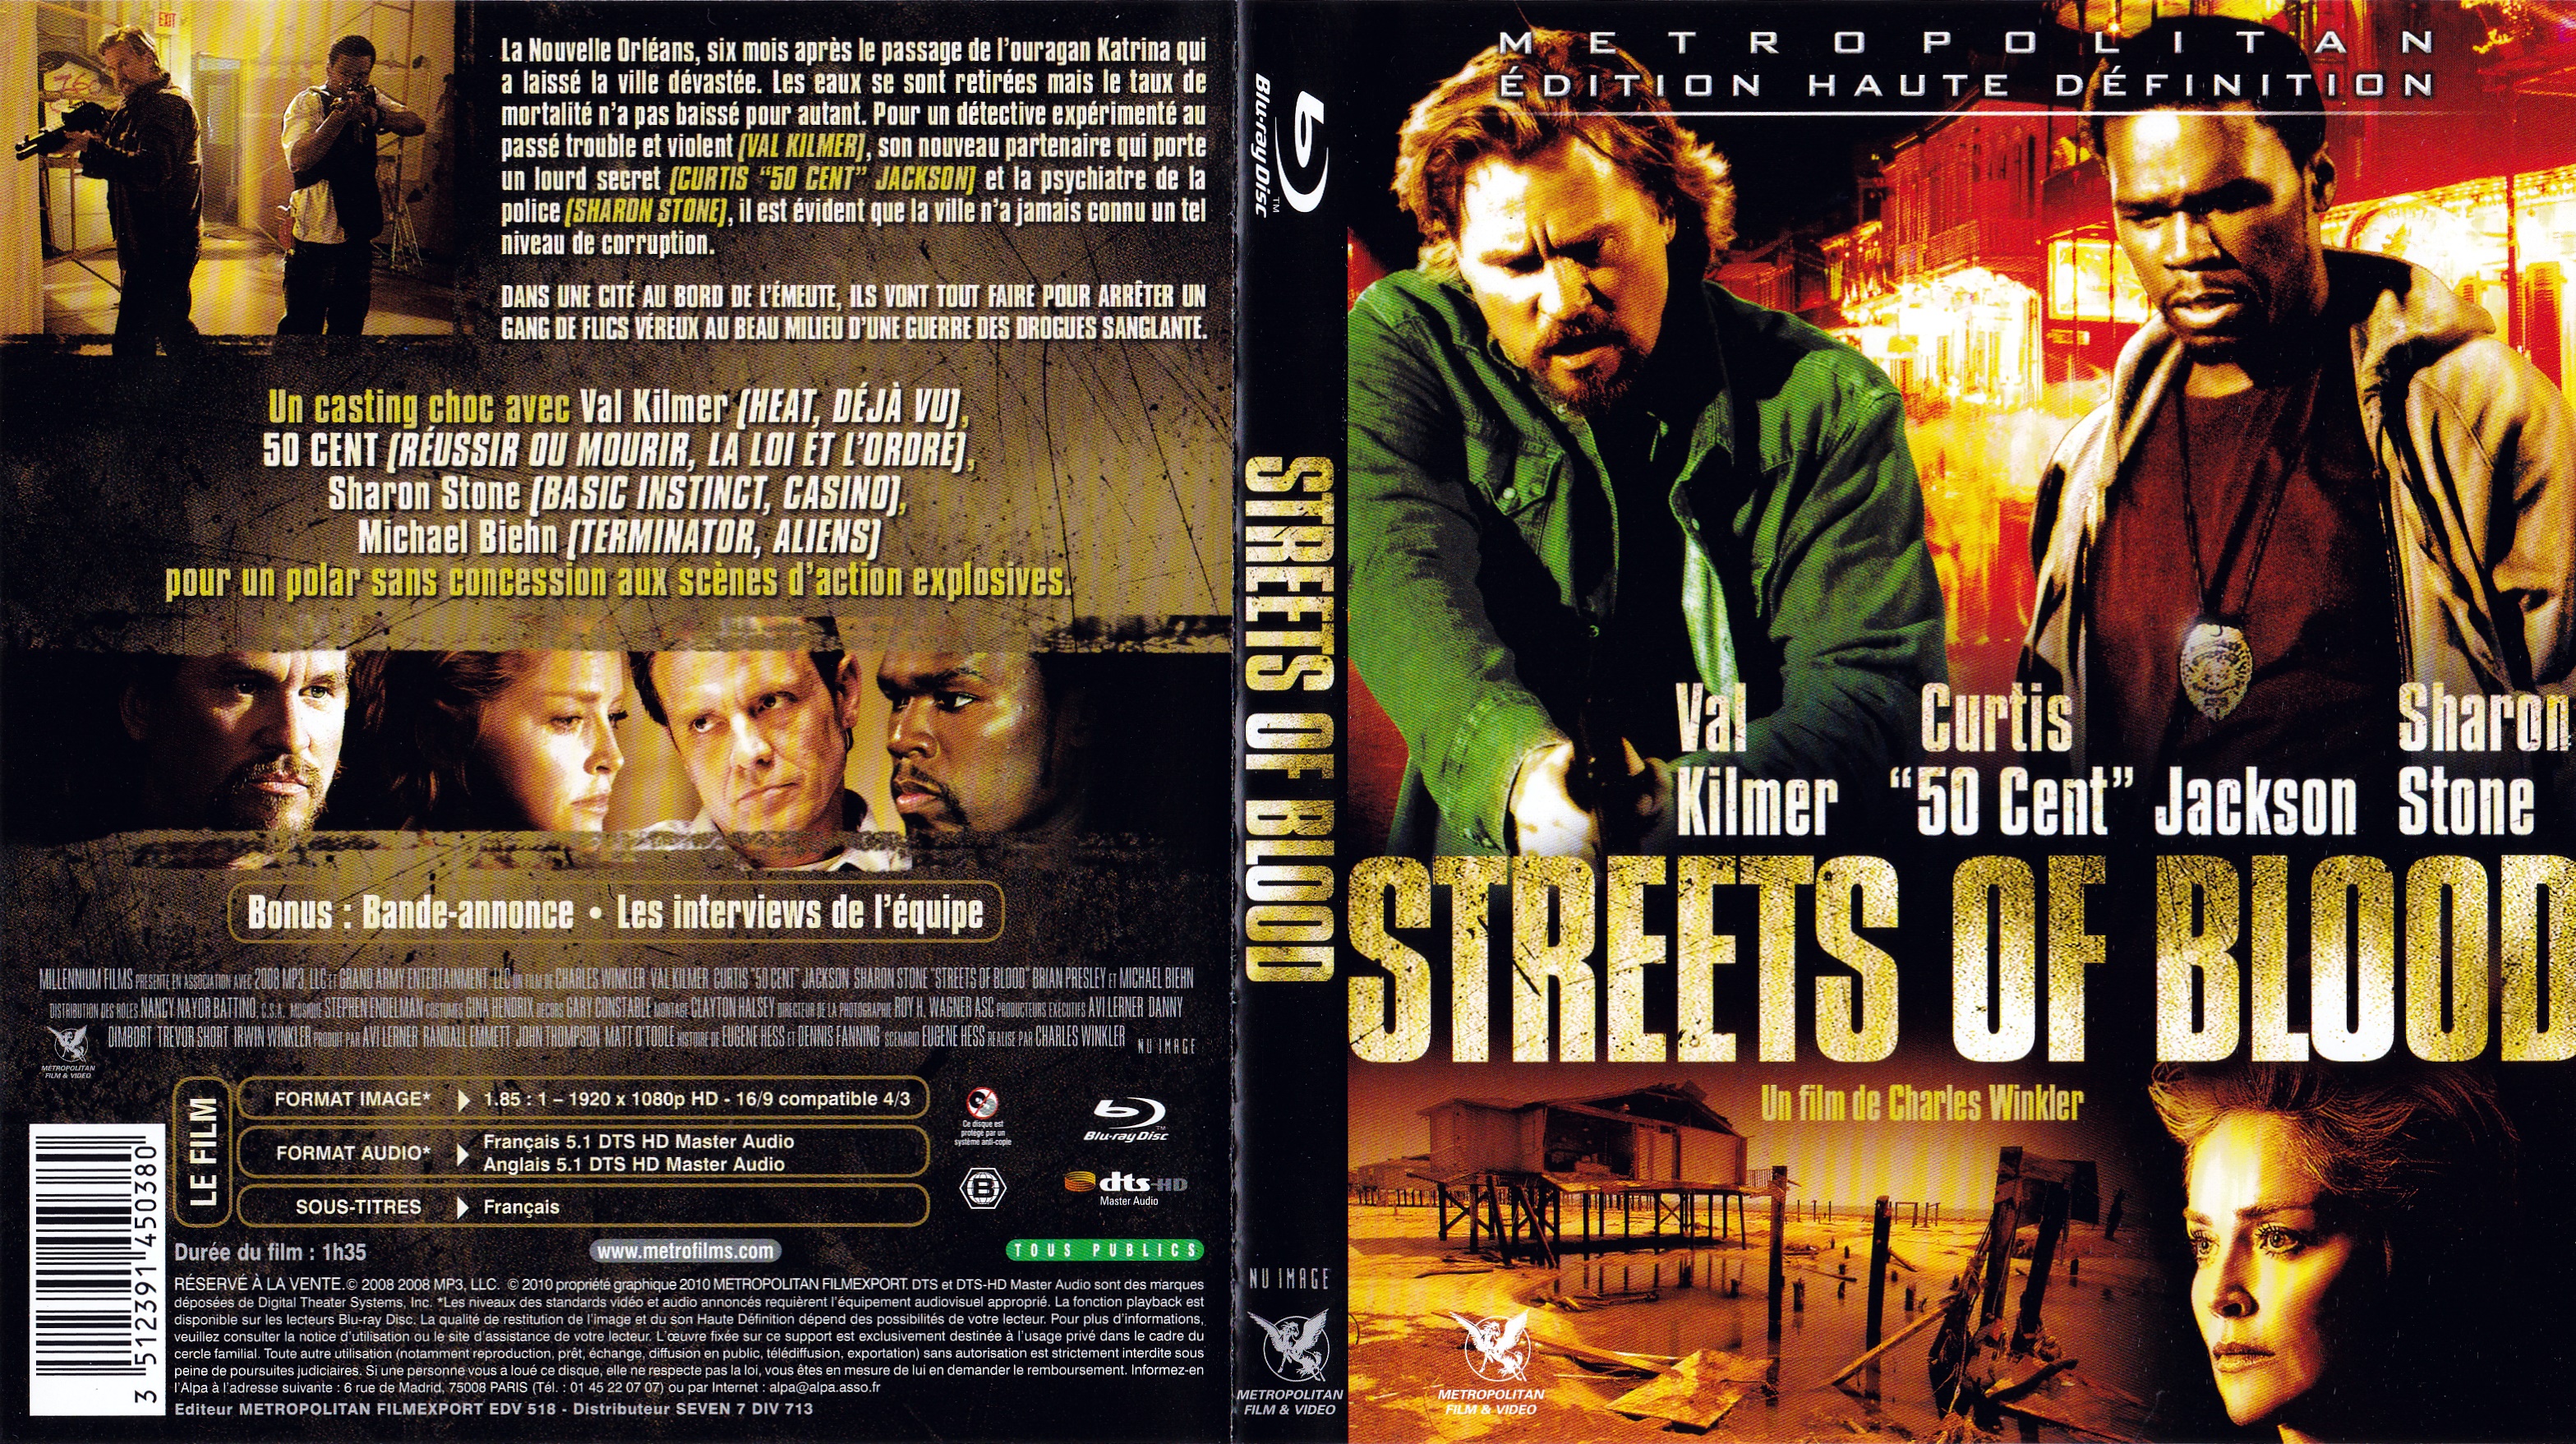 Jaquette DVD Streets of blood (BLU-RAY)